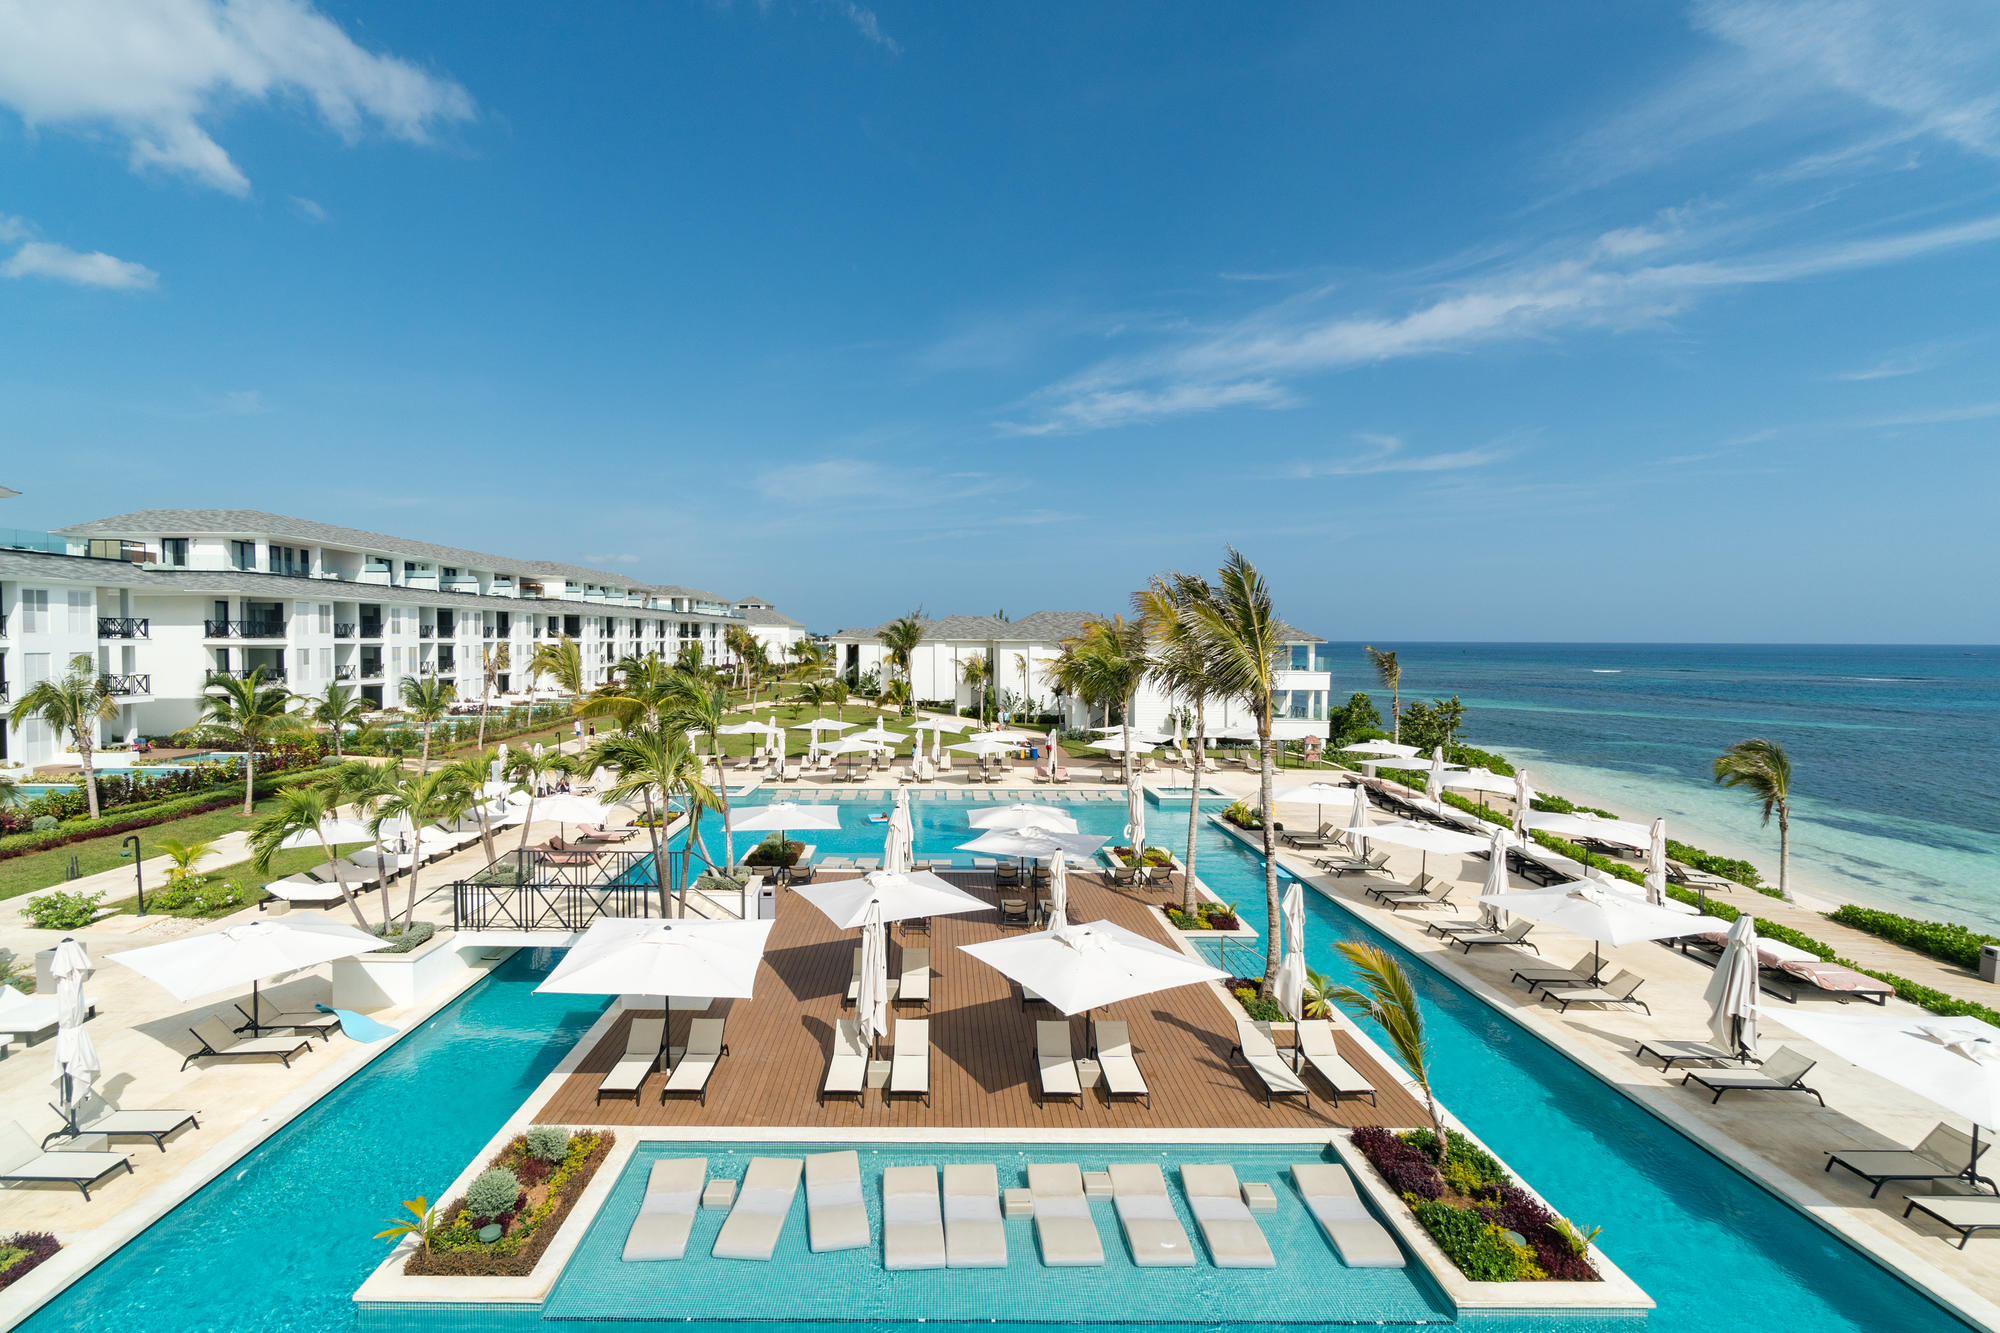 All Inclusive Resorts Caribbean Cheap Just go Inalong